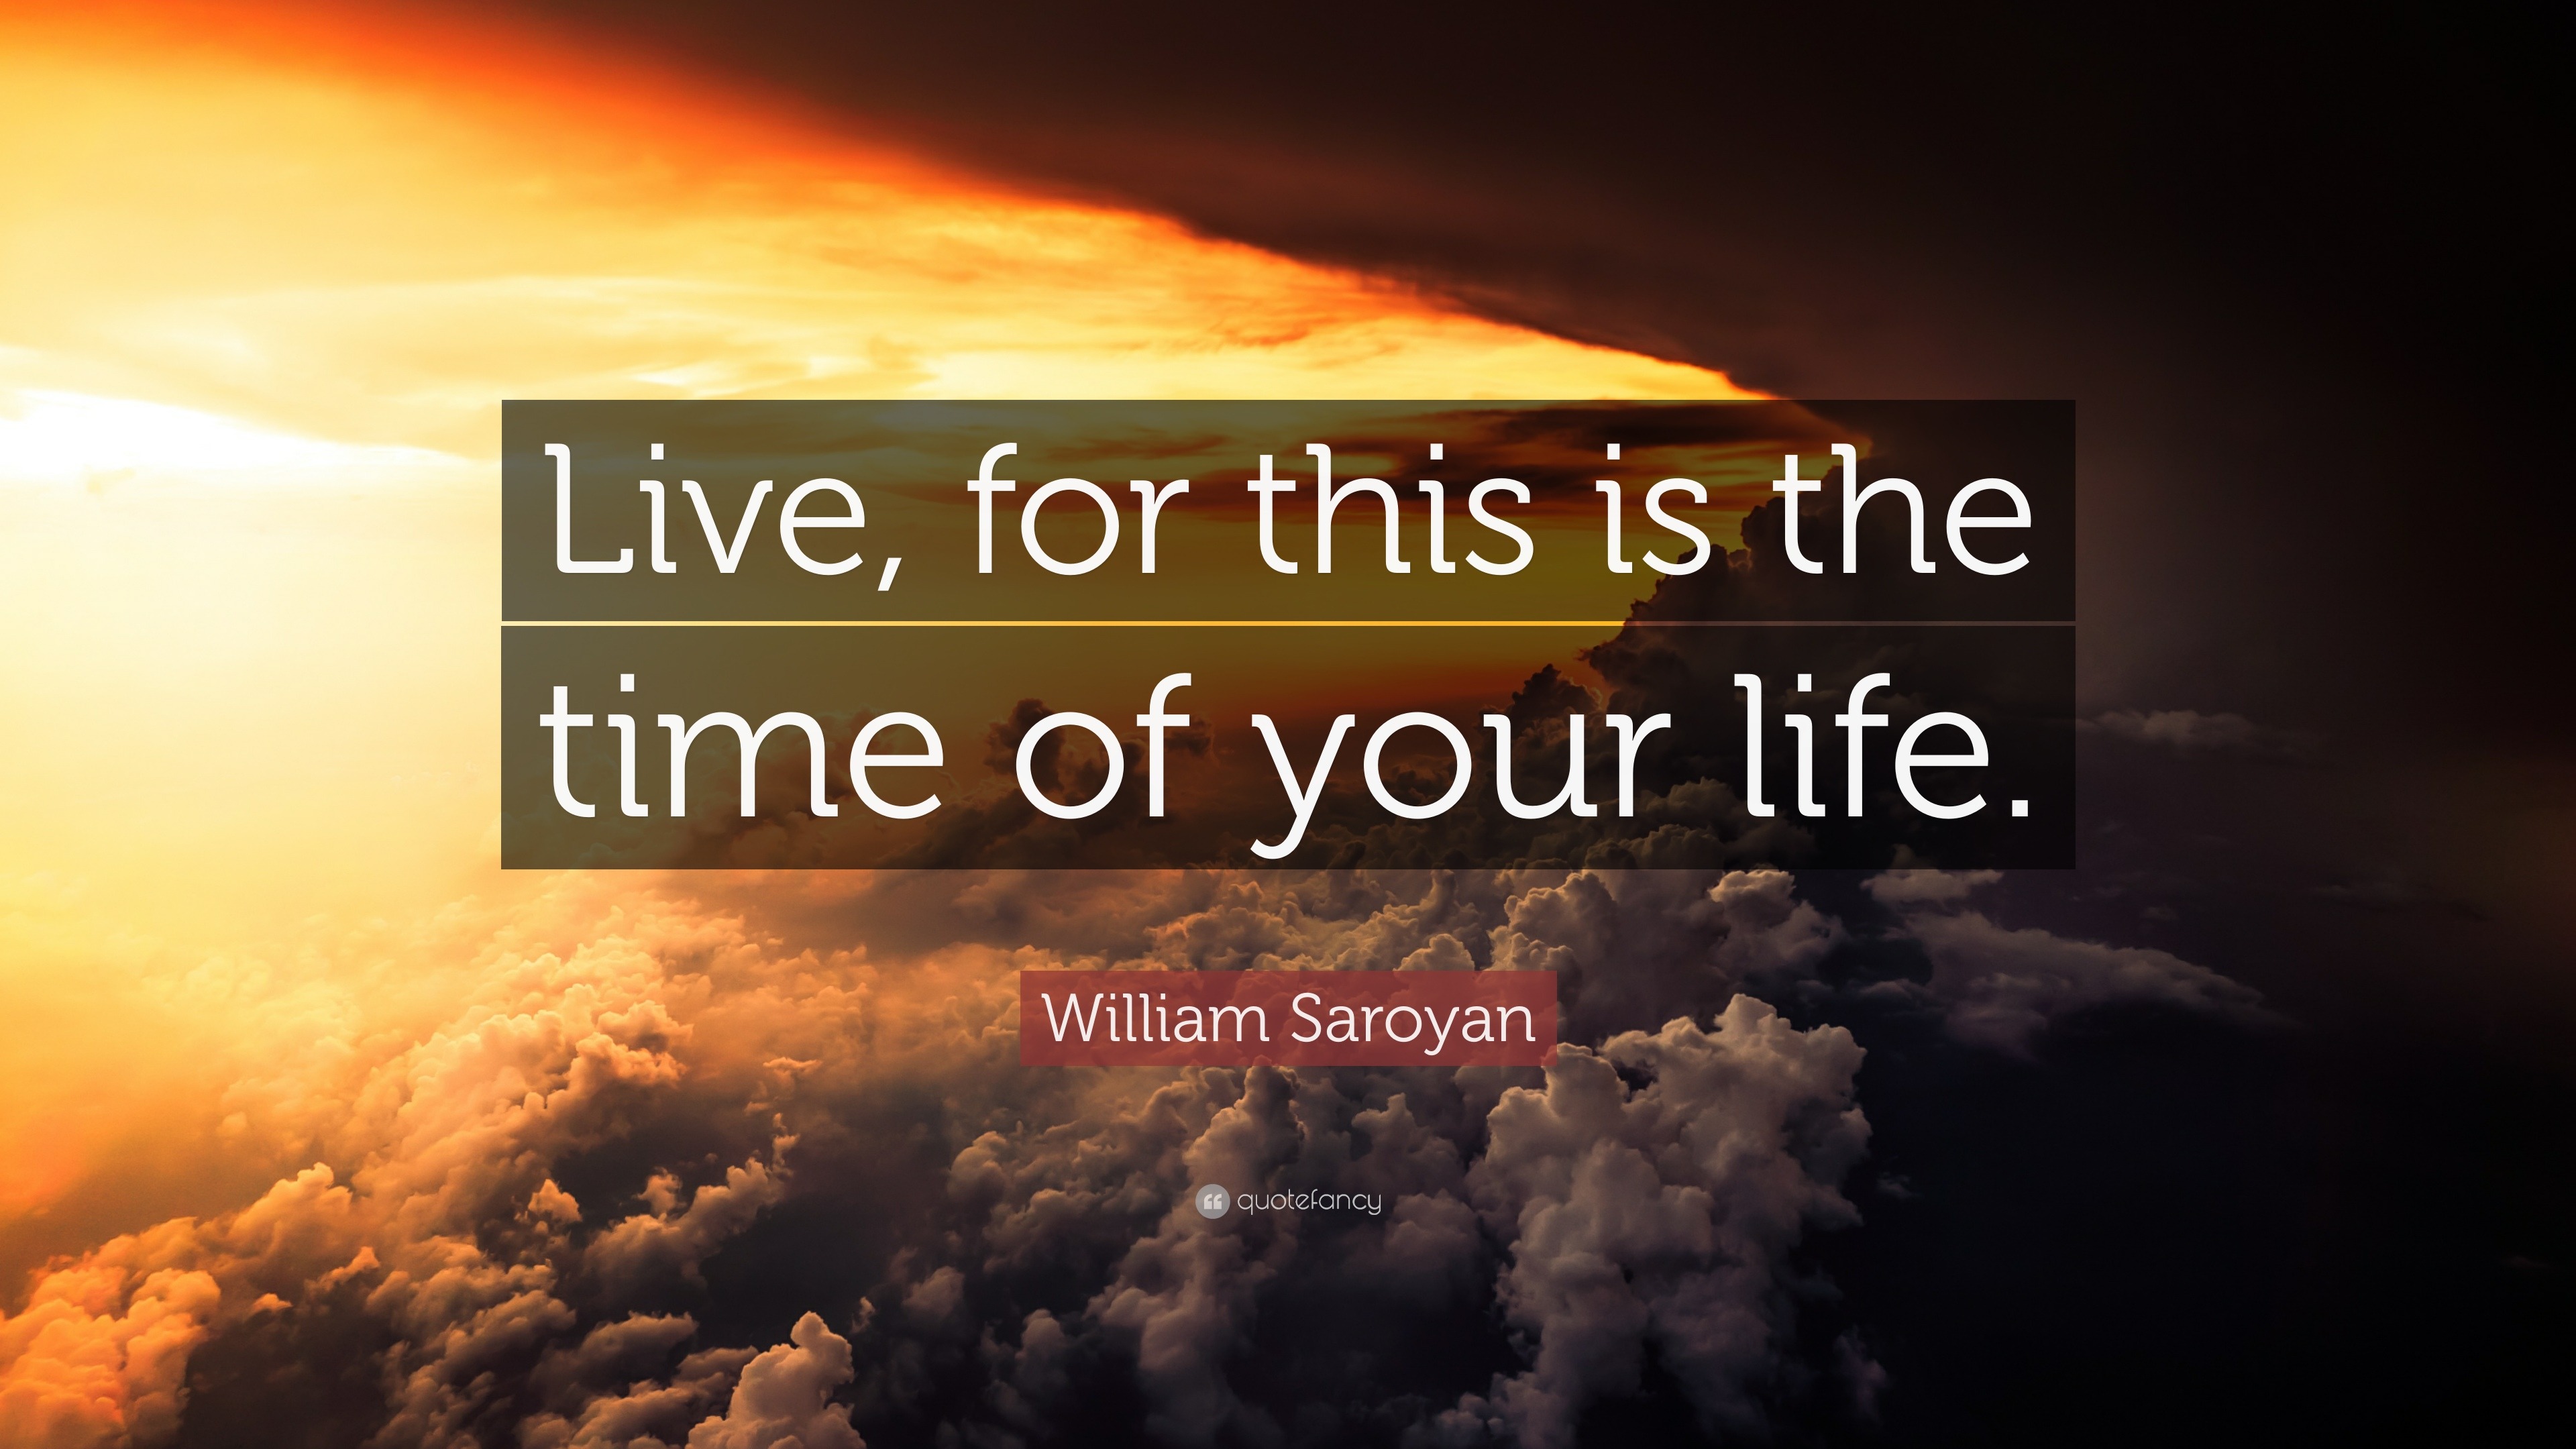 William Saroyan Quote Live For This Is The Time Of Your Life